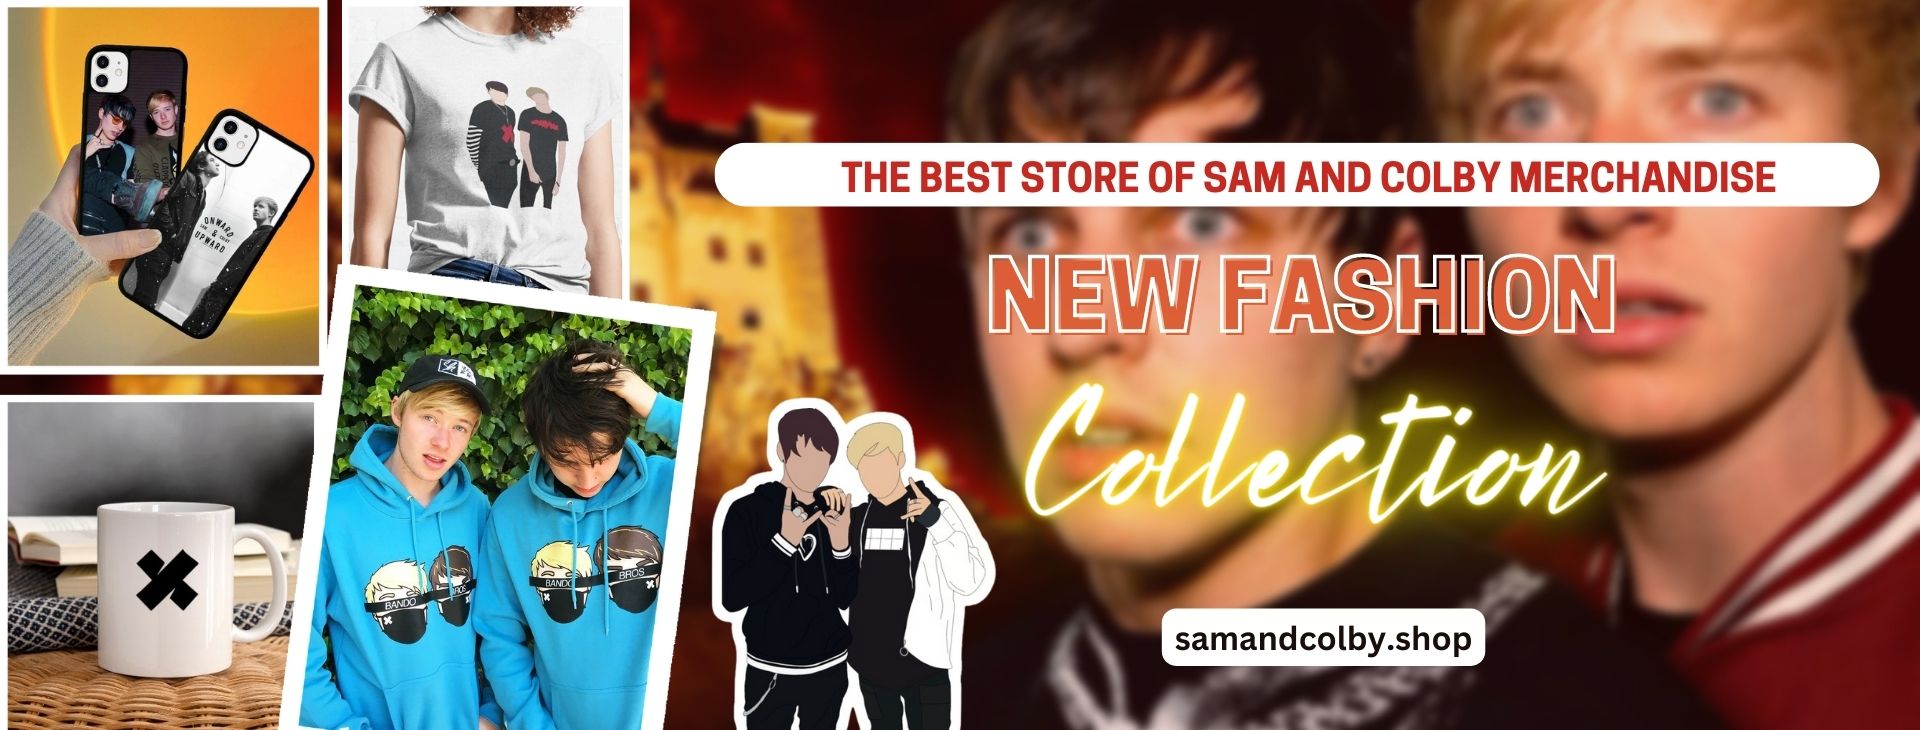 no edit sam and colby banner - Sam And Colby Shop